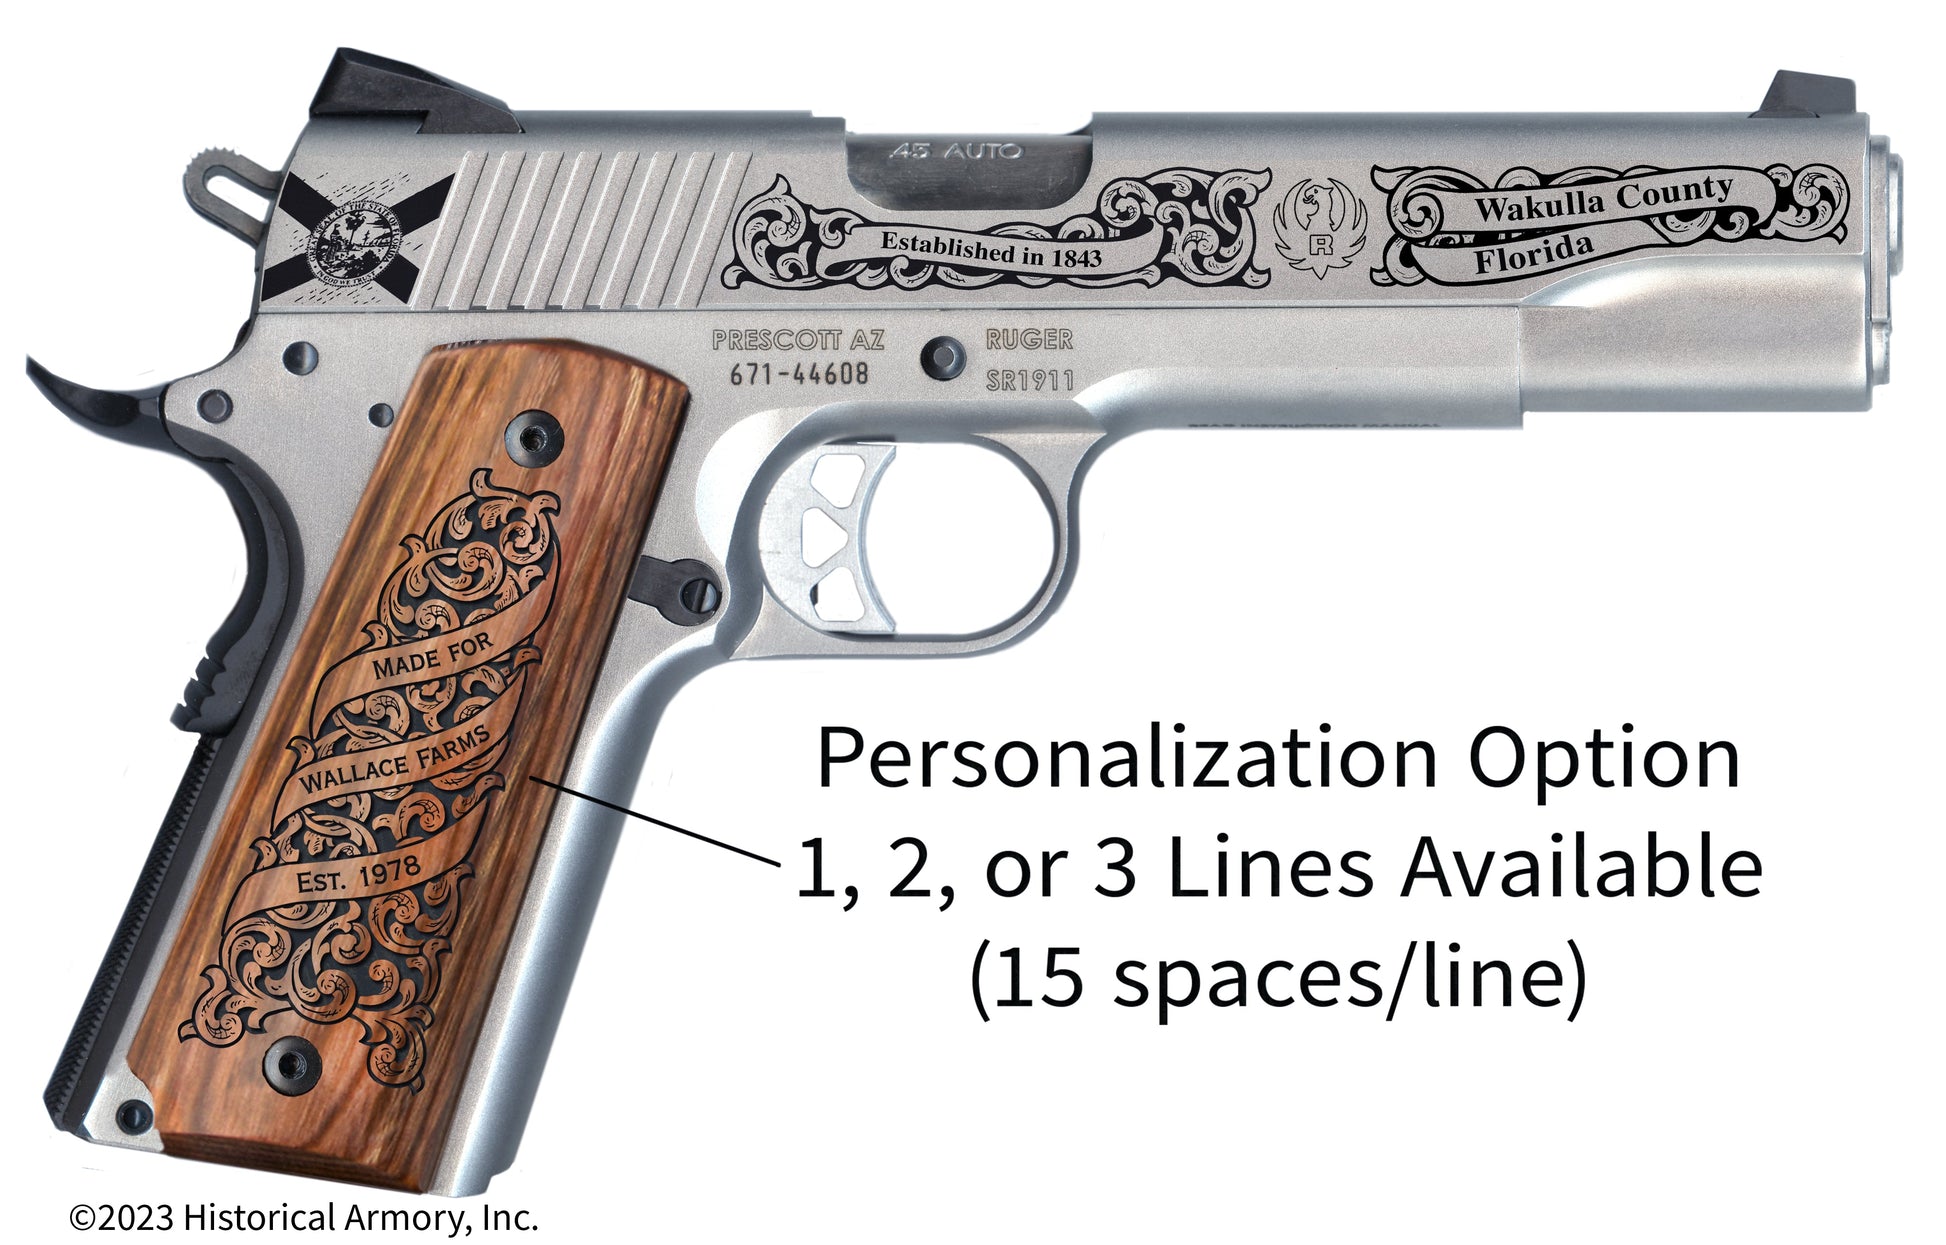 Wakulla County Florida Personalized Engraved .45 Auto Ruger 1911